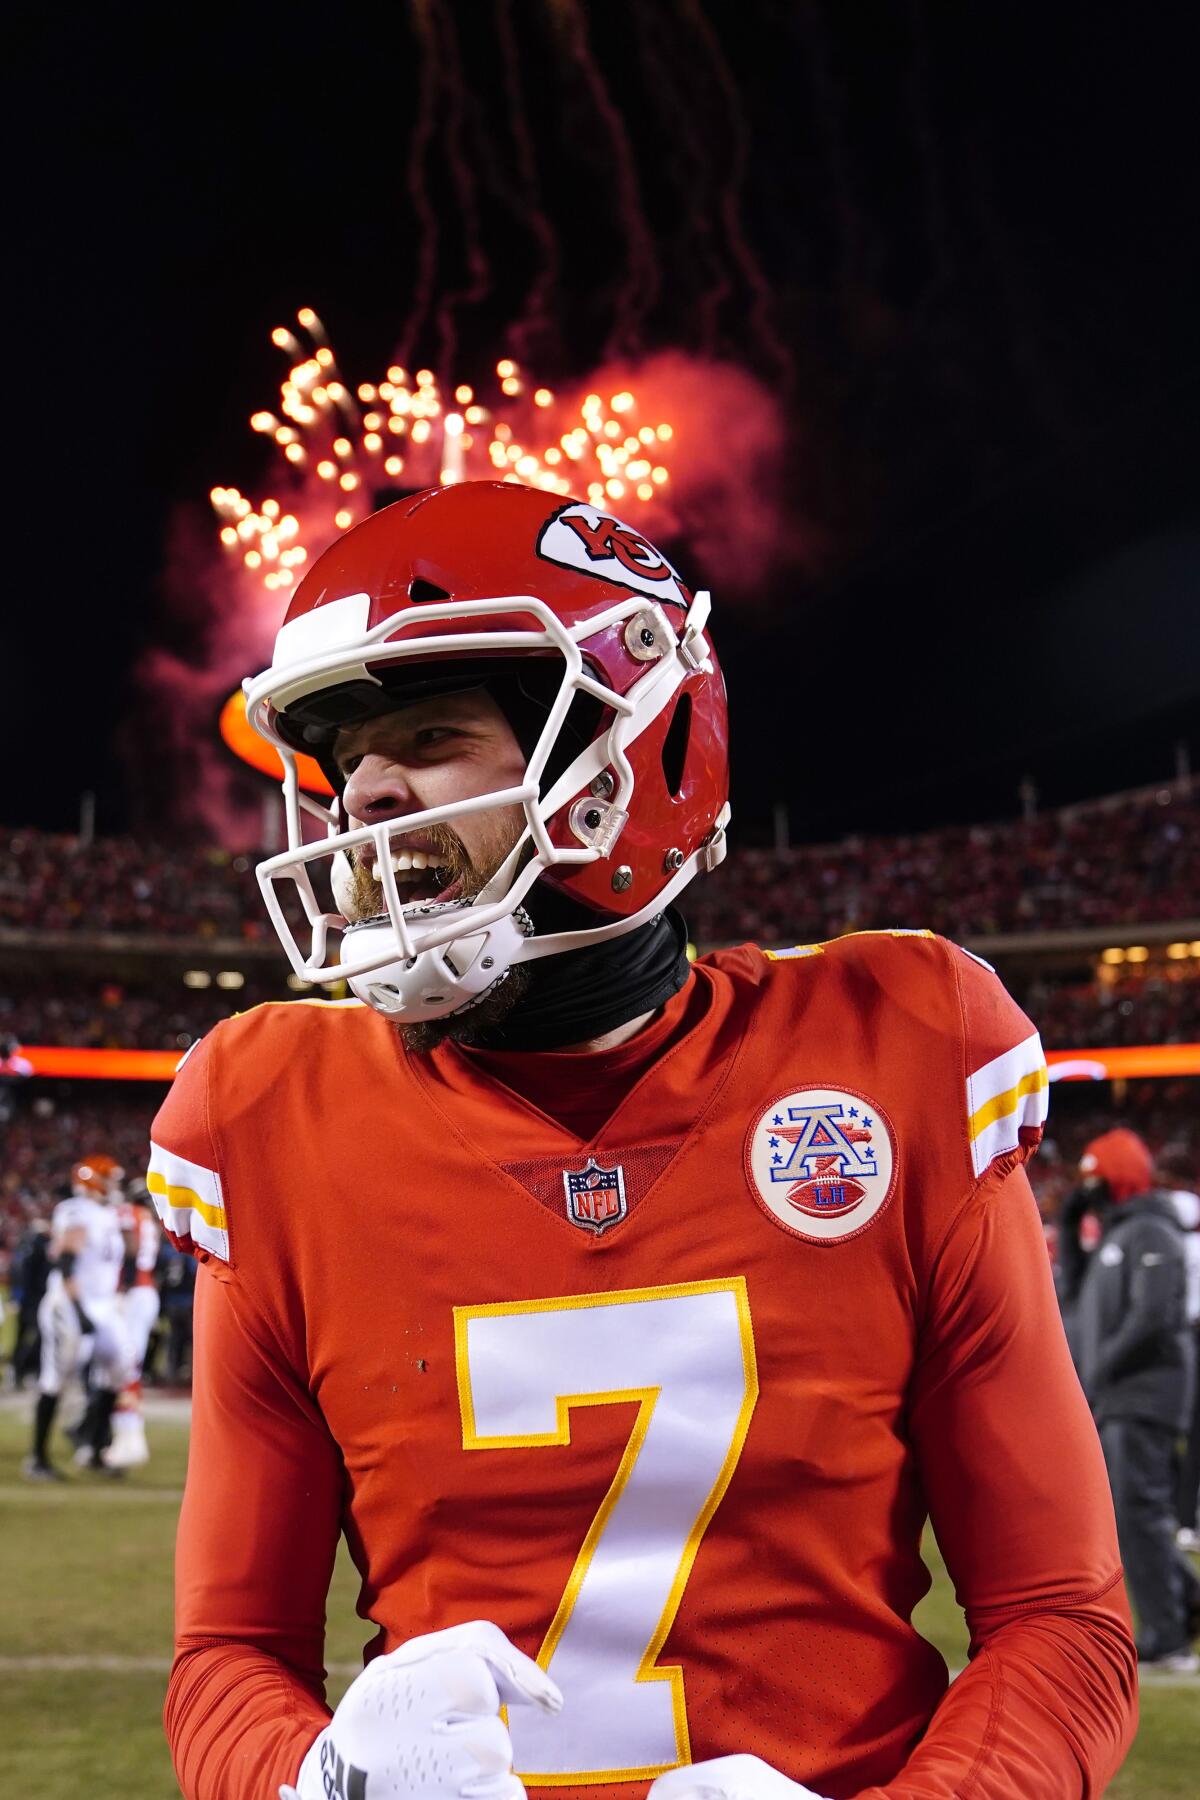 The Chiefs have won 8 straight season openers. They have a ways to go to  catch the longest streak